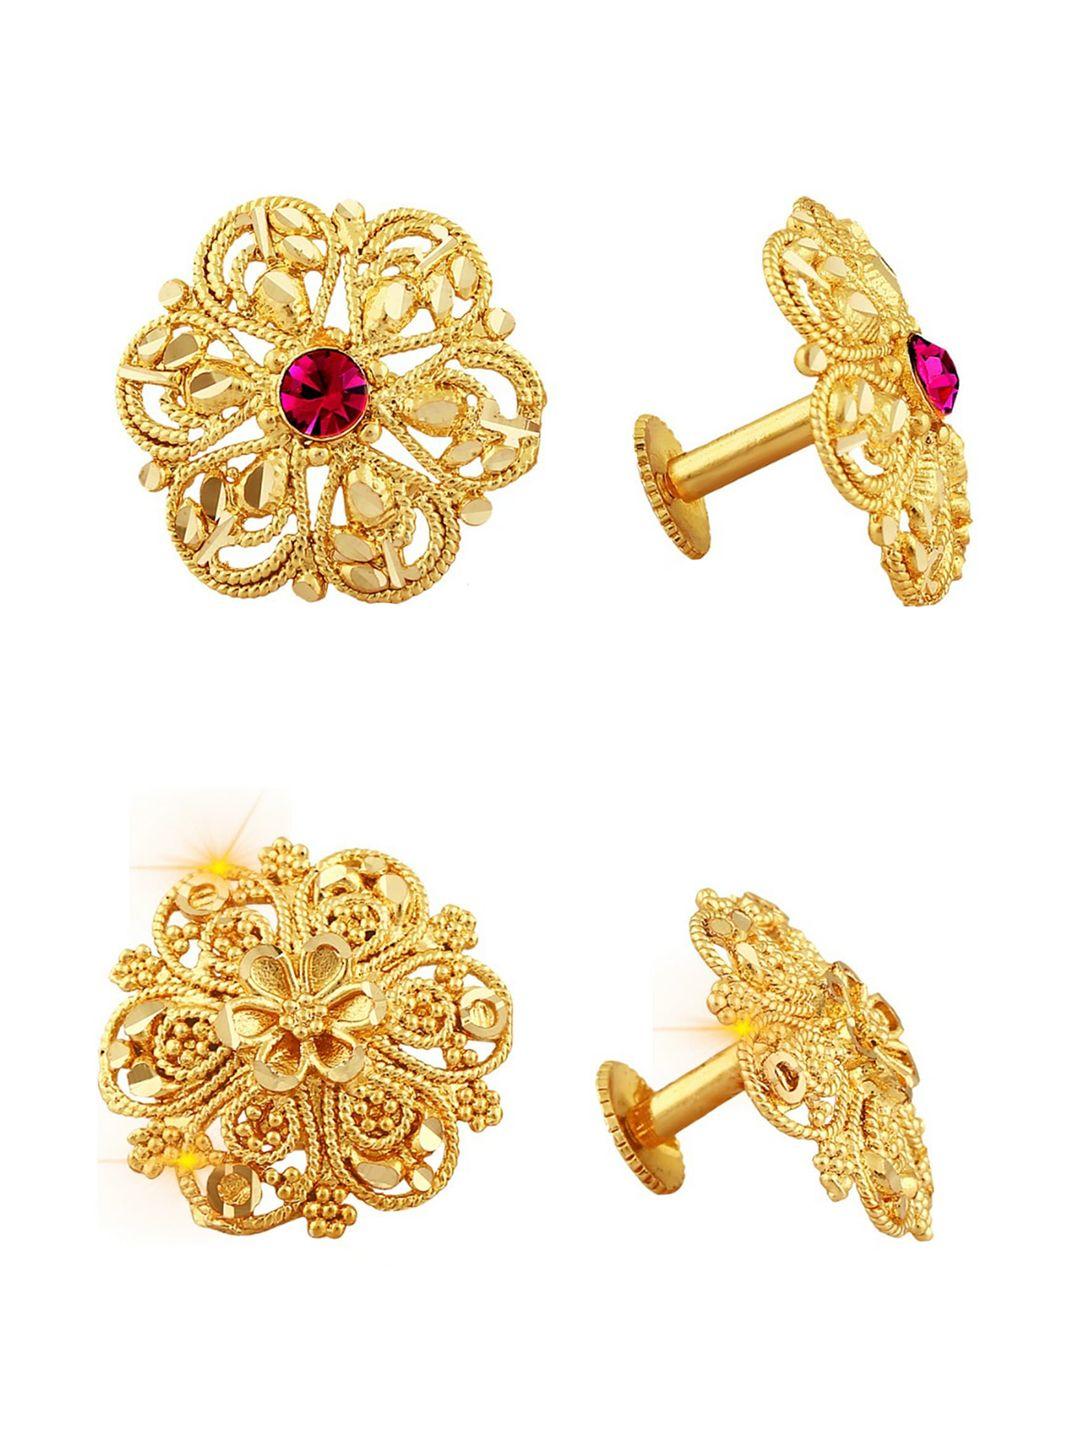 vighnaharta set of 2 gold-toned floral studs earrings